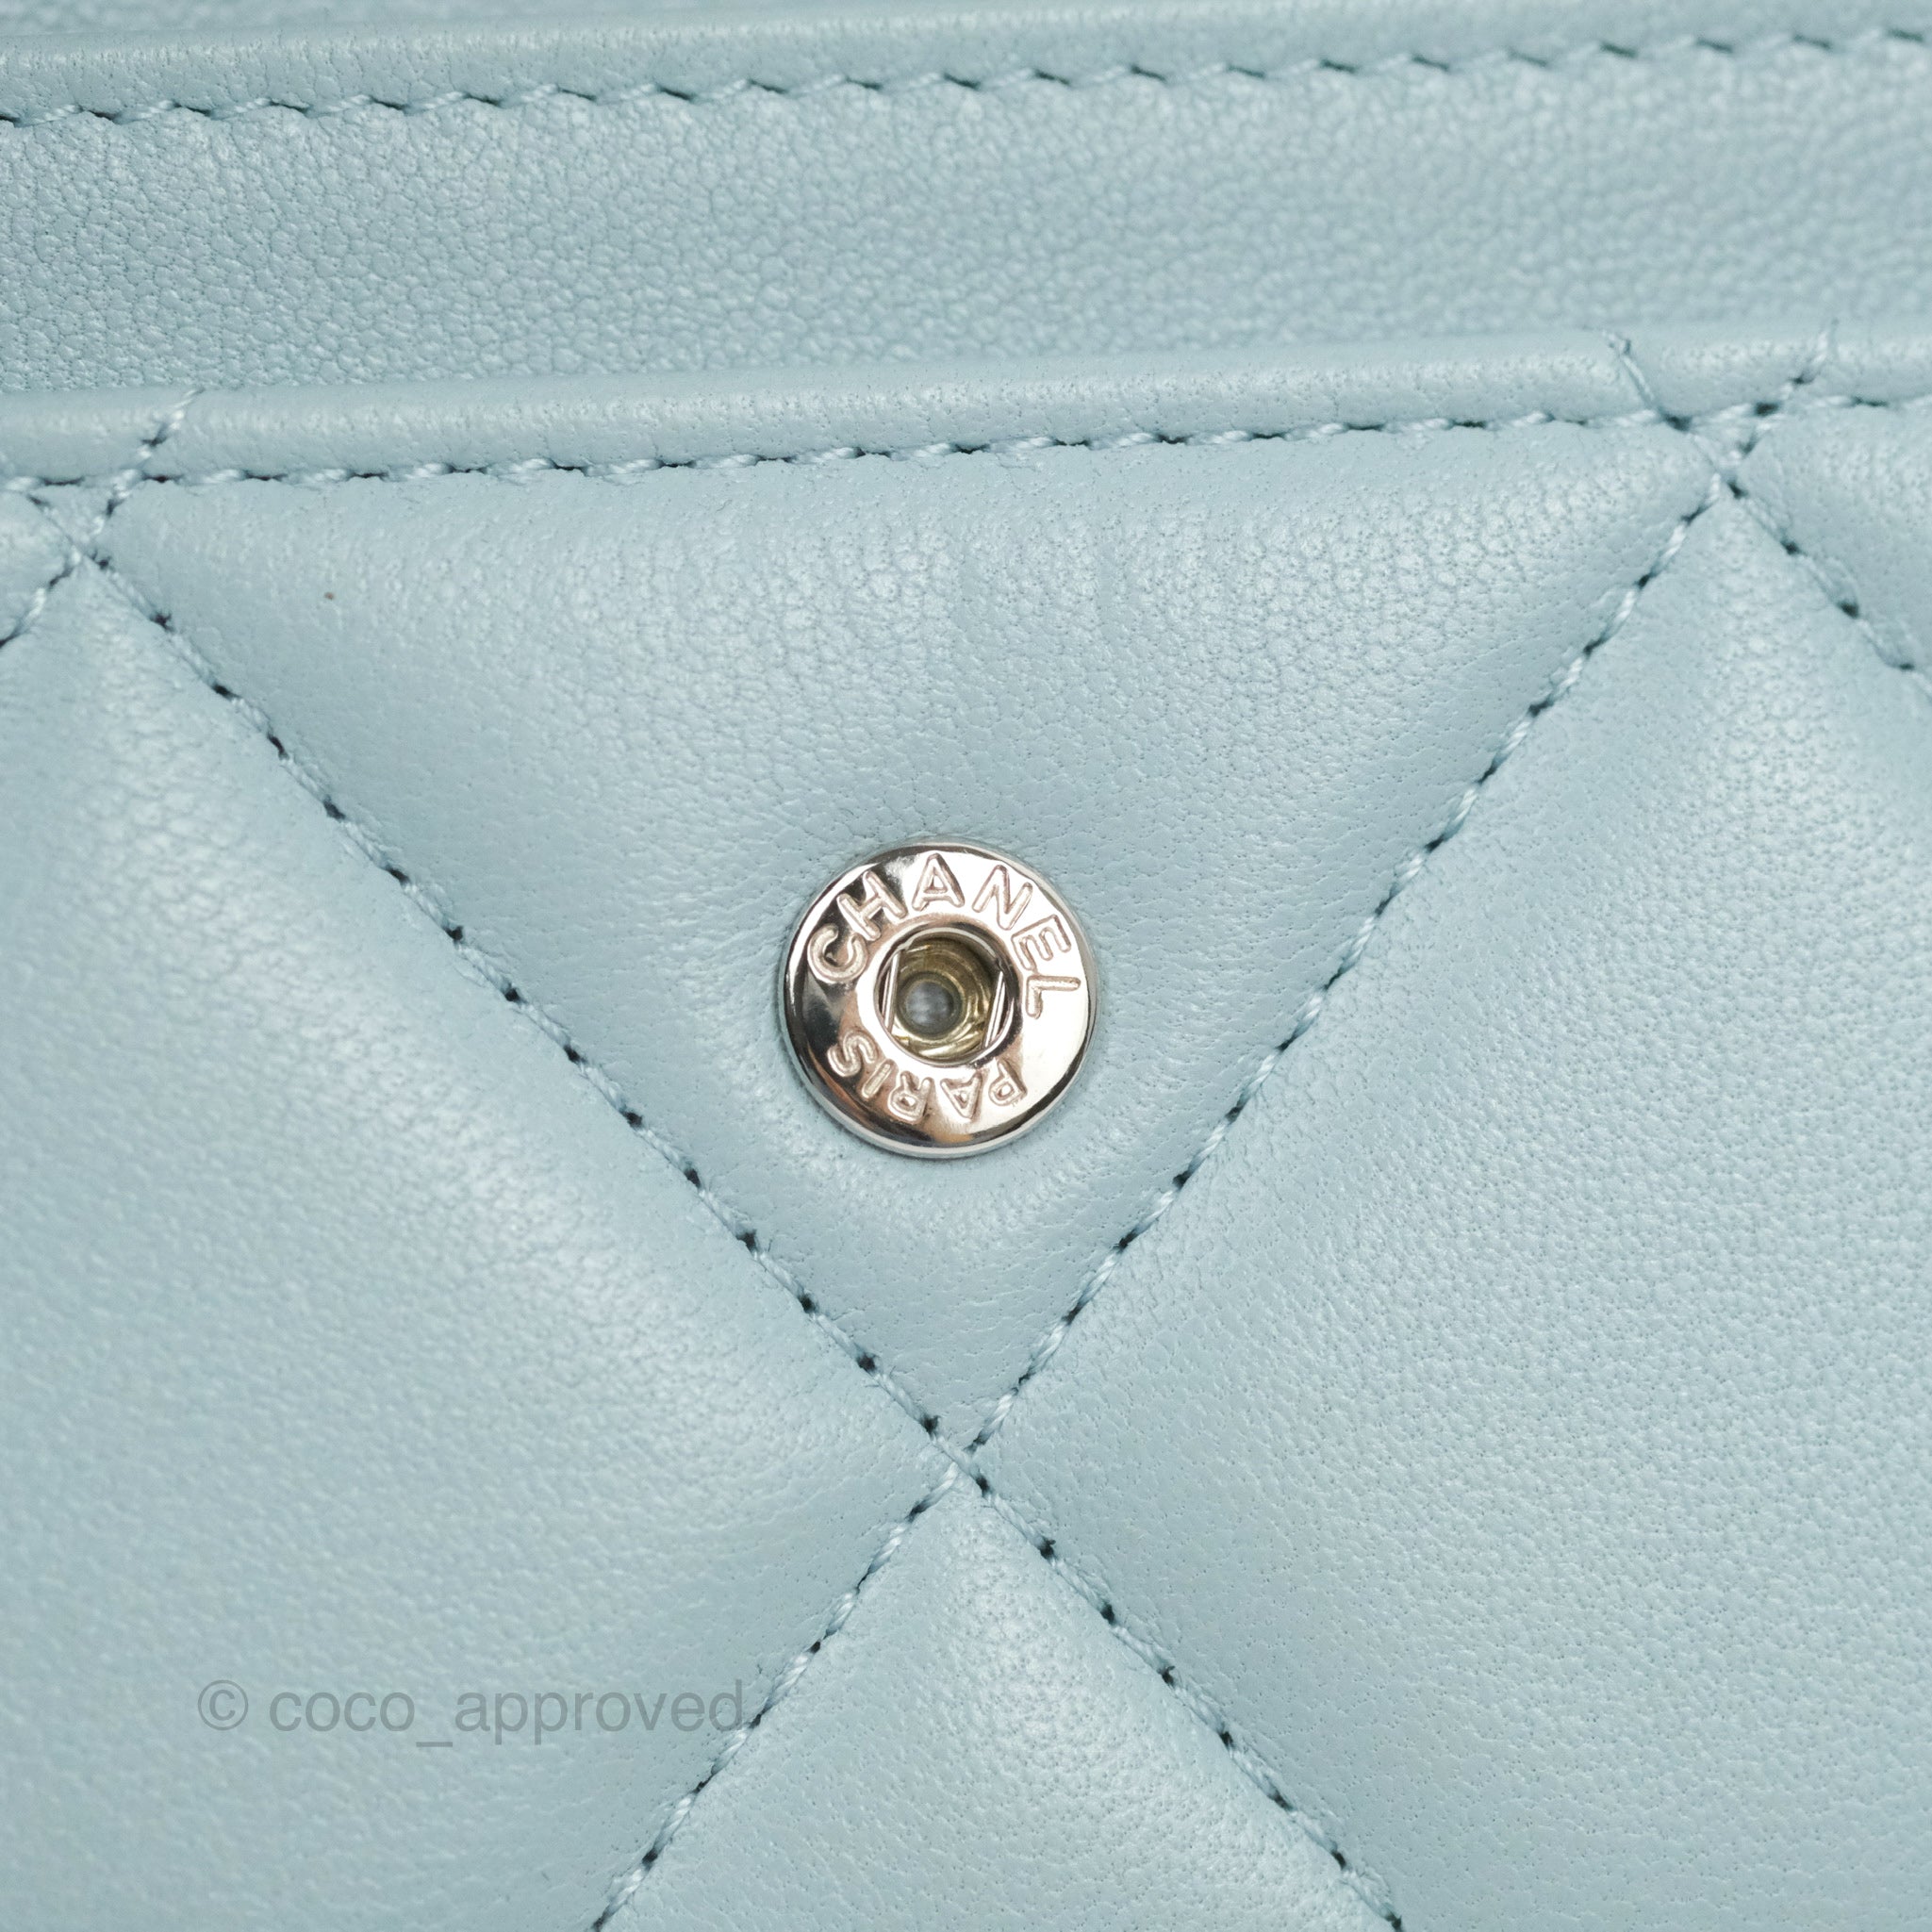 Chanel 19 Quilted Flap Card Holder Light Blue Lambskin – Coco